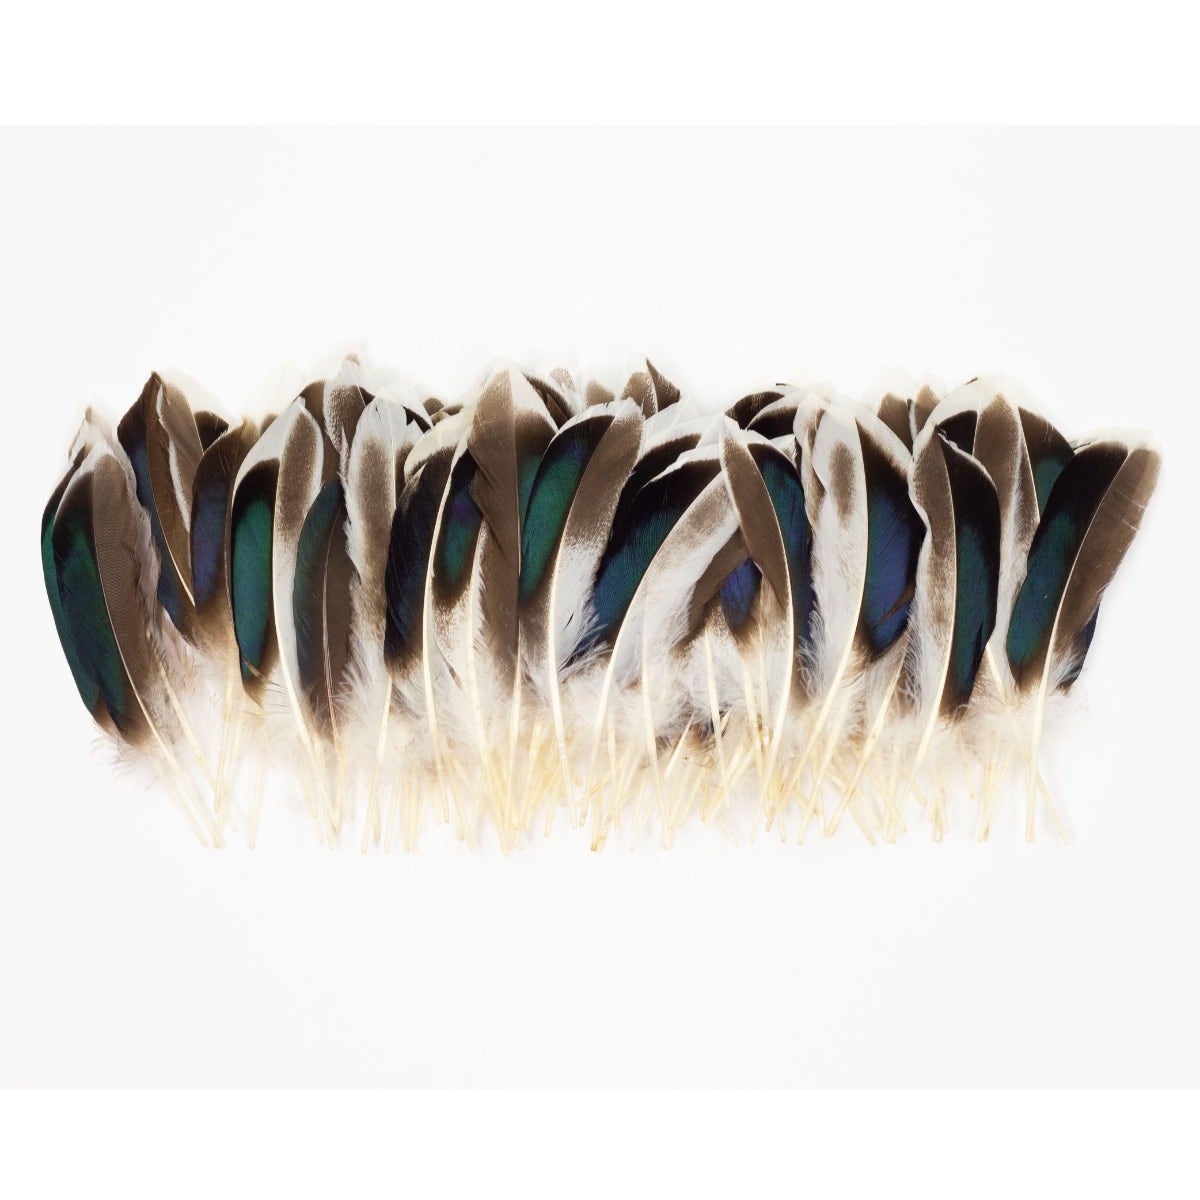 100 Piece Goose Feathers, Natural Feathers For Crafts, Diy